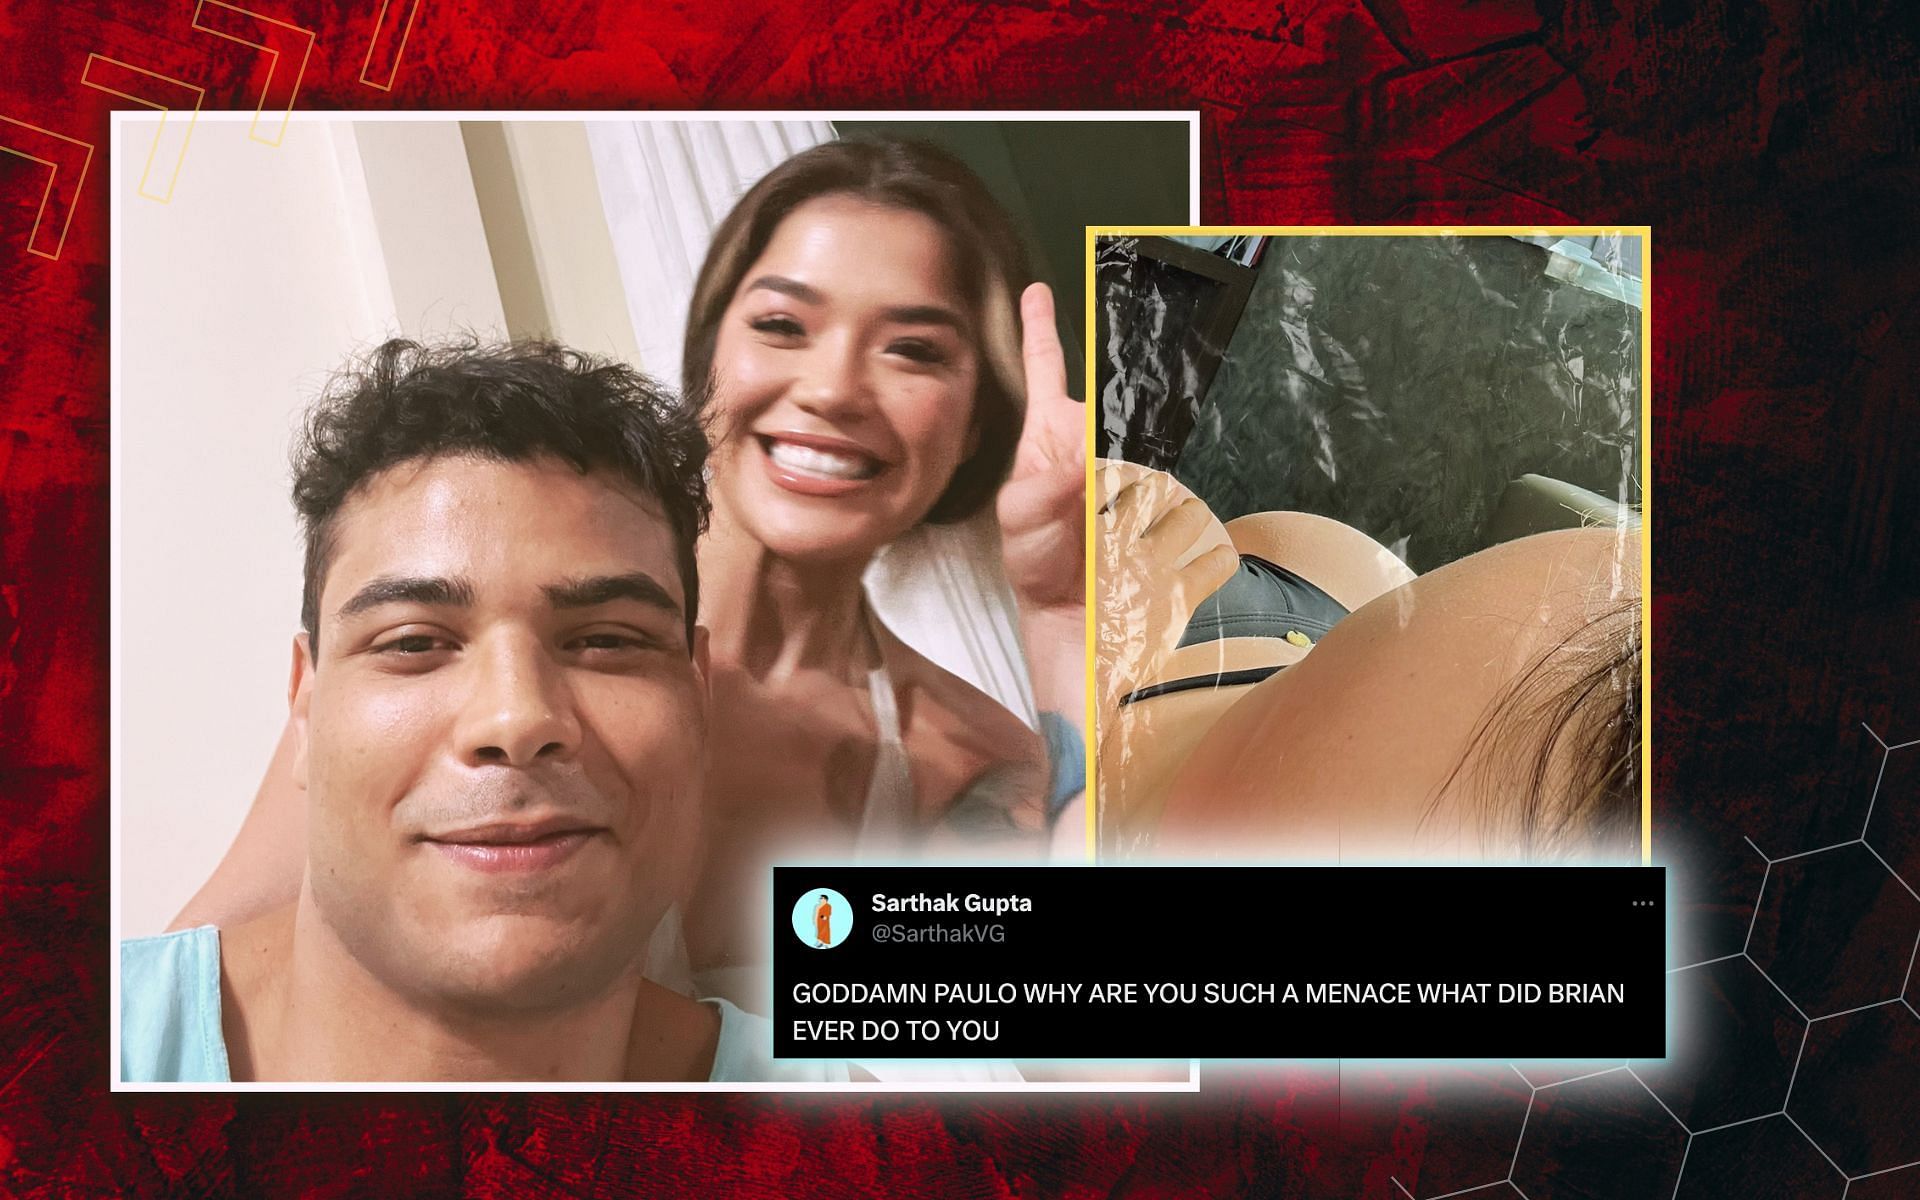 Paulo Costa X-rated bed image following meet with Tracy Cortez. [Image credits: @BorrachinhaMMA on Twitter]